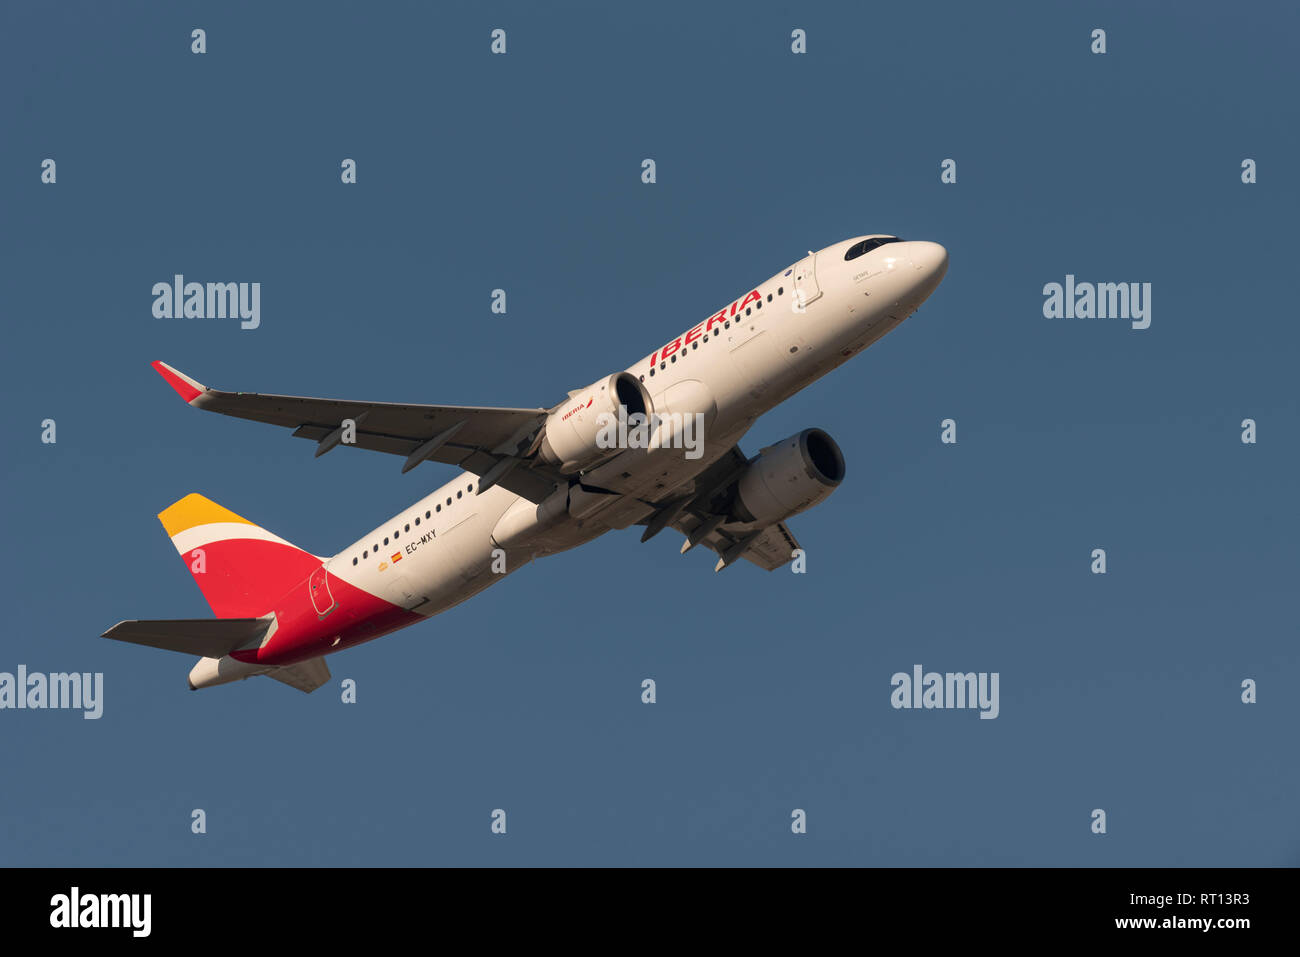 Iberia Airbus A320 jet airliner plane EC-MXY taking off from London Heathrow Airport, UK. Airline flight departure. Named Getafe Stock Photo